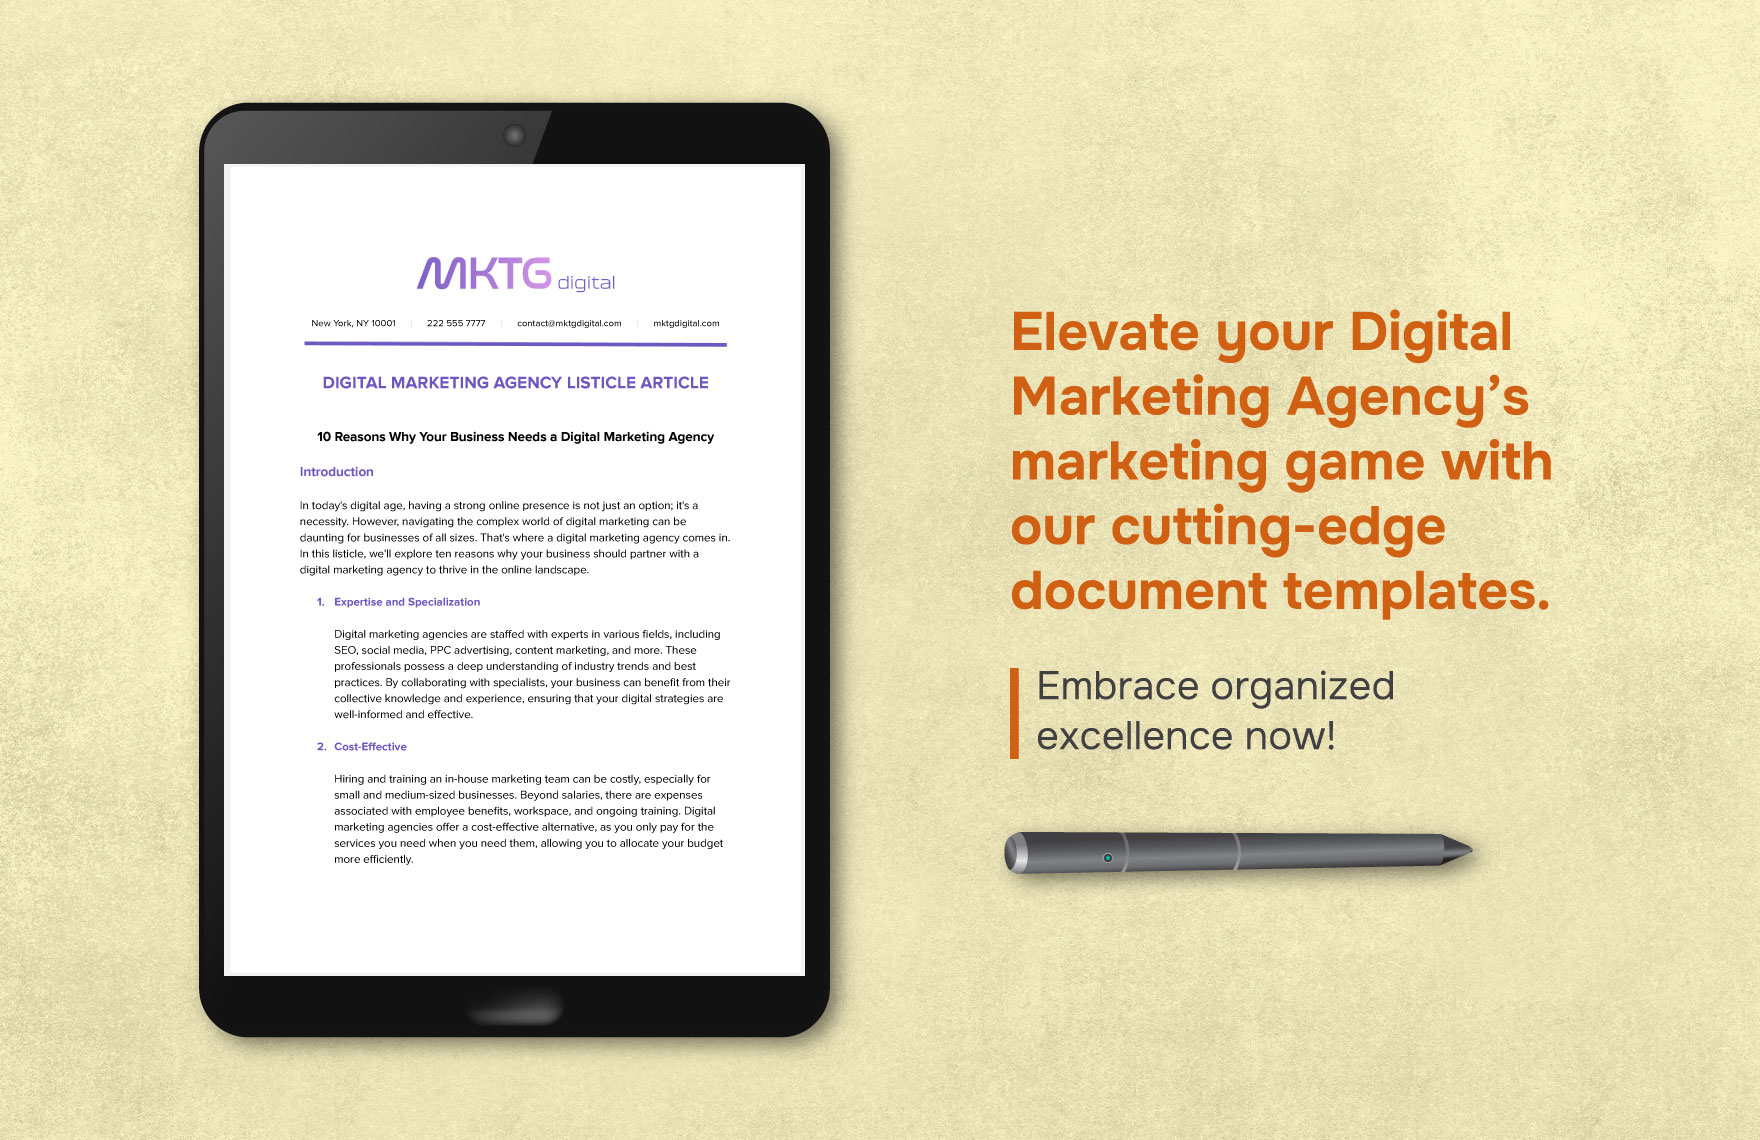 Digital Marketing Agency Listicle Article Template